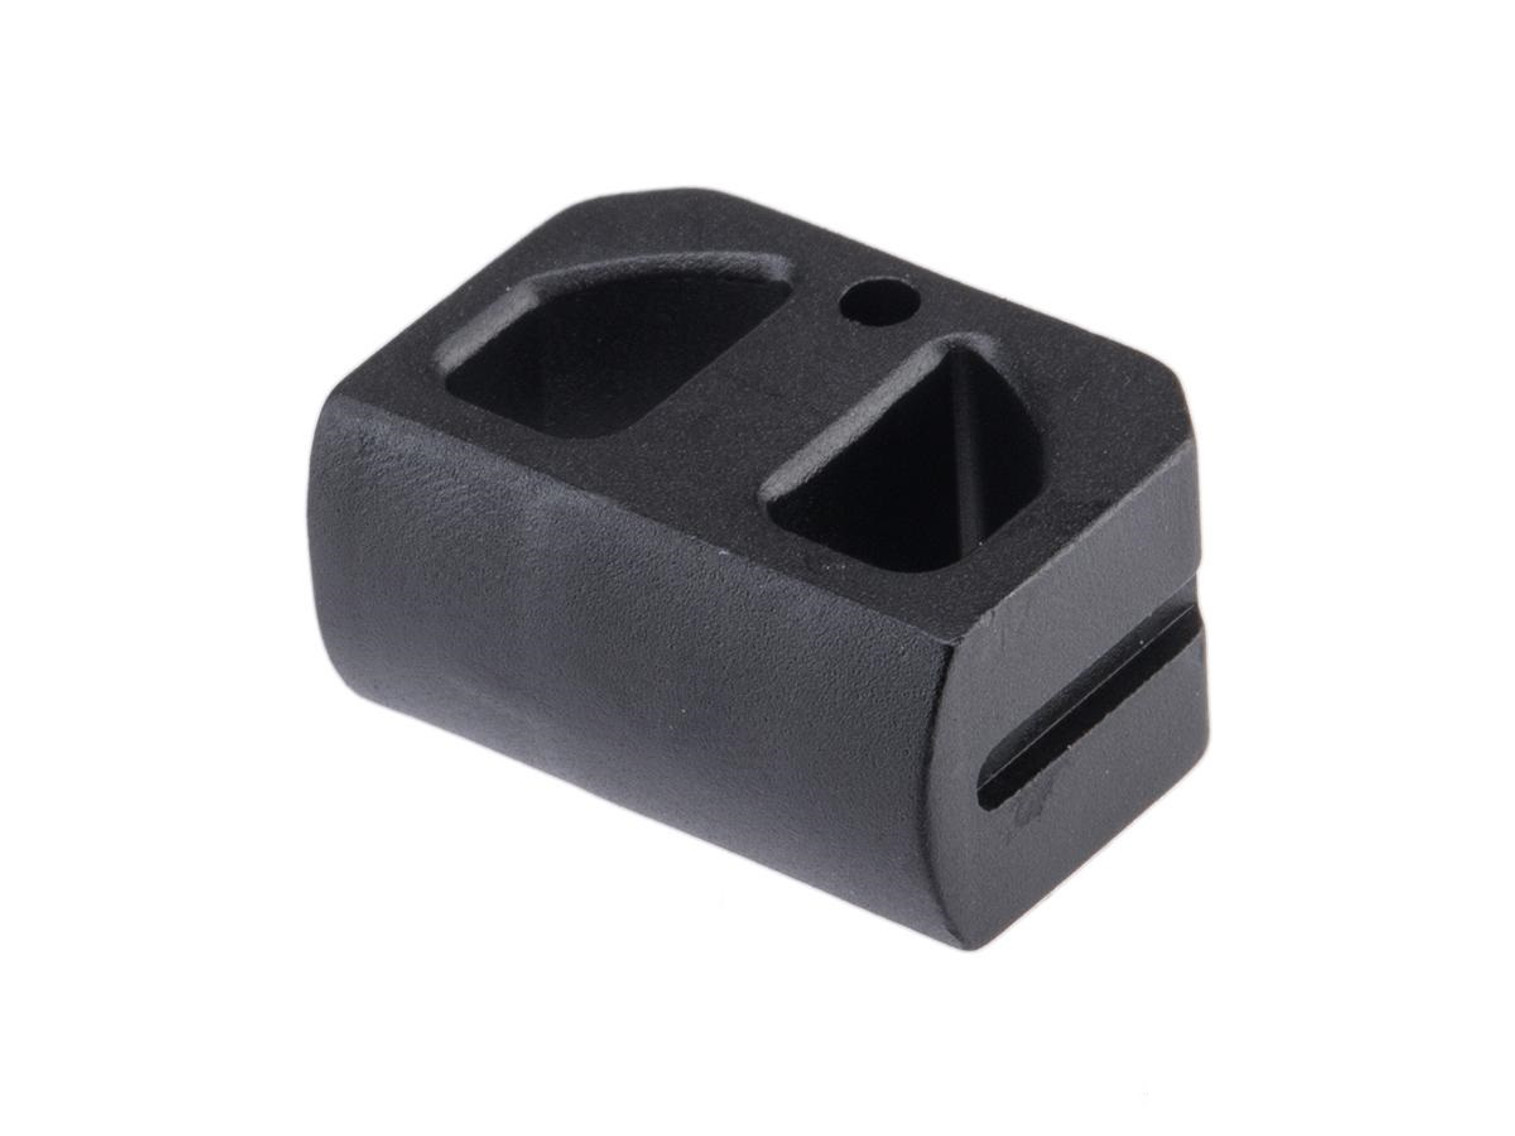 NOVRITSCH Replacement Trigger for SSR90 Airsoft AEG SMGs
